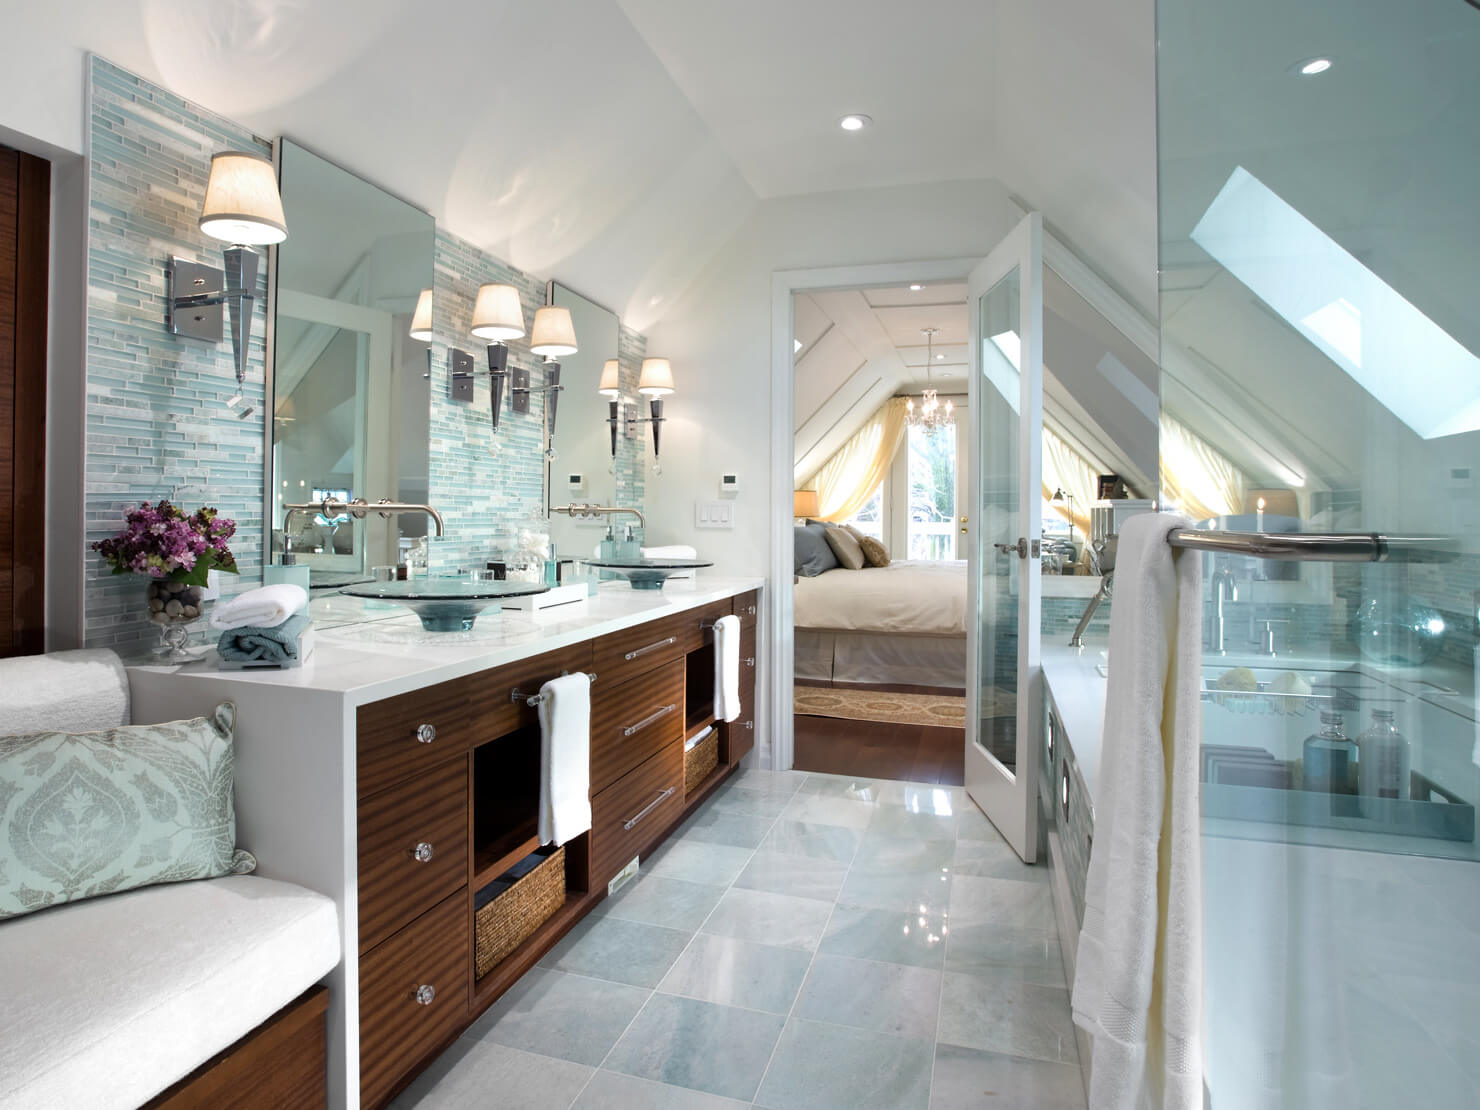 Create Your Own Luxurious Home Designs In The Attic